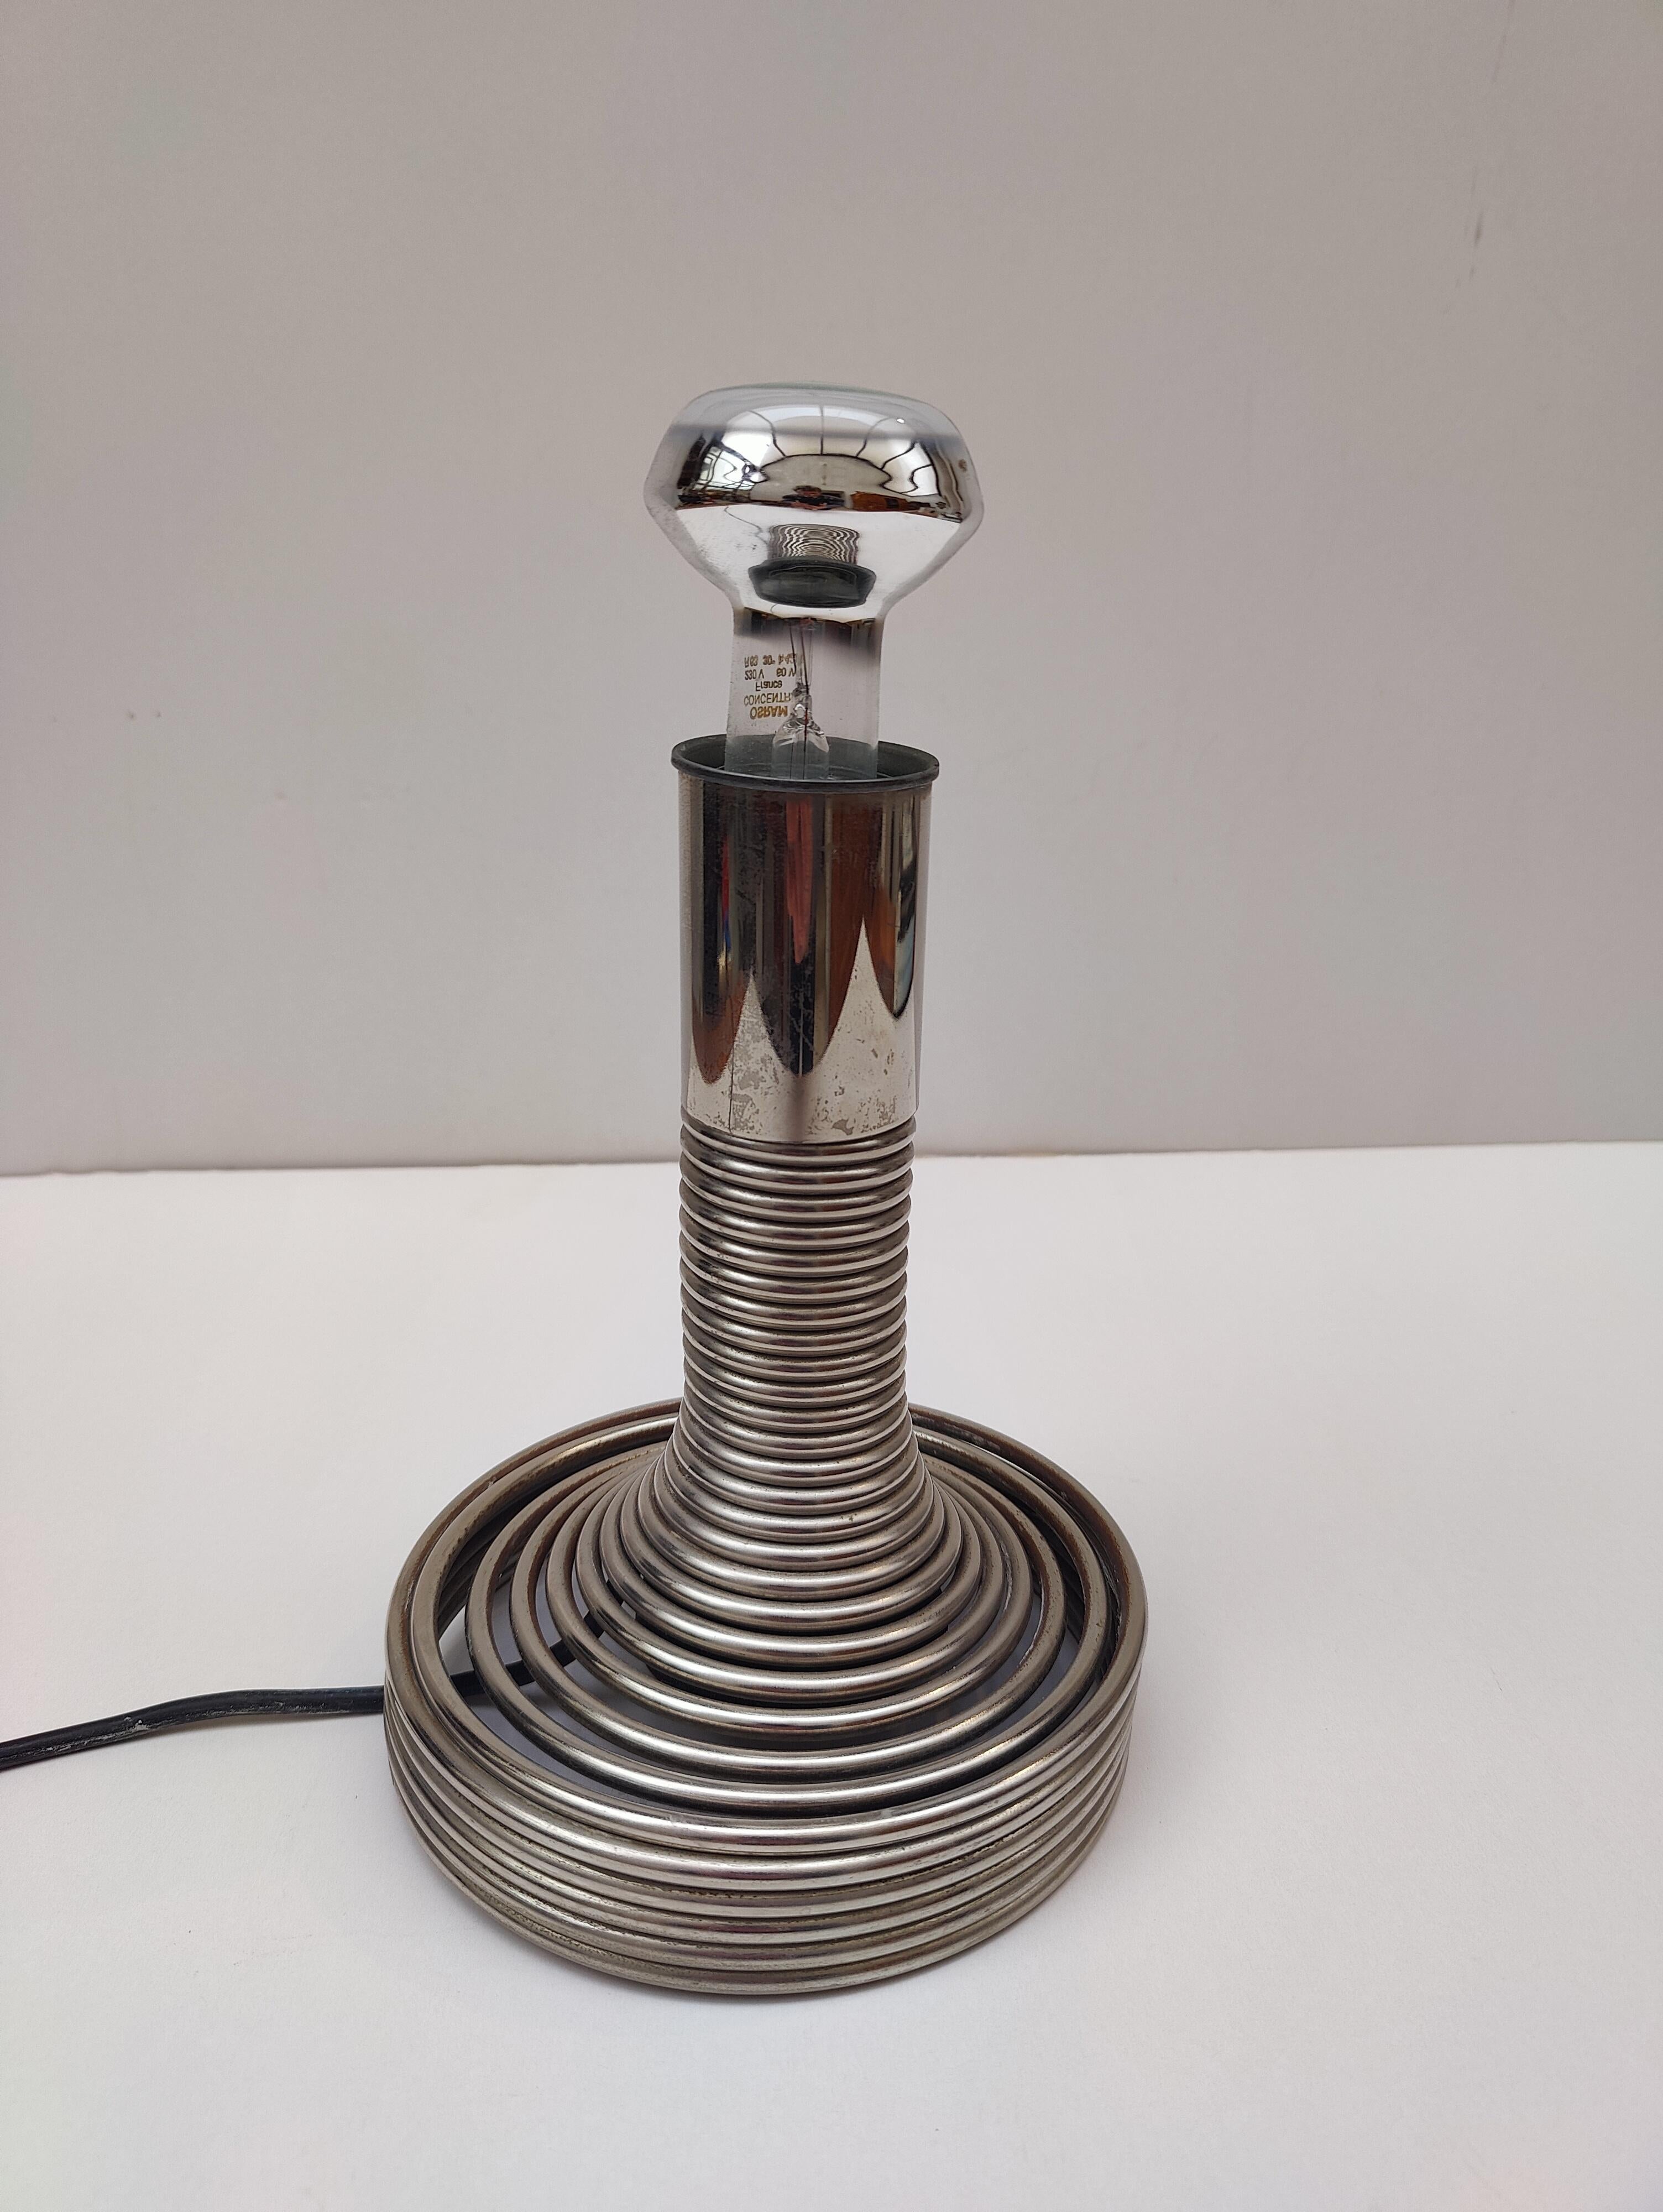 Introducing the Fabulous “Spirale” table lamp by Angelo Mangiarotti, Italy circa 1970, now available for sale. This stunning piece was manufactured in Italy by an unknown maker and features a chromed steel spring with a hidden and integrated switch